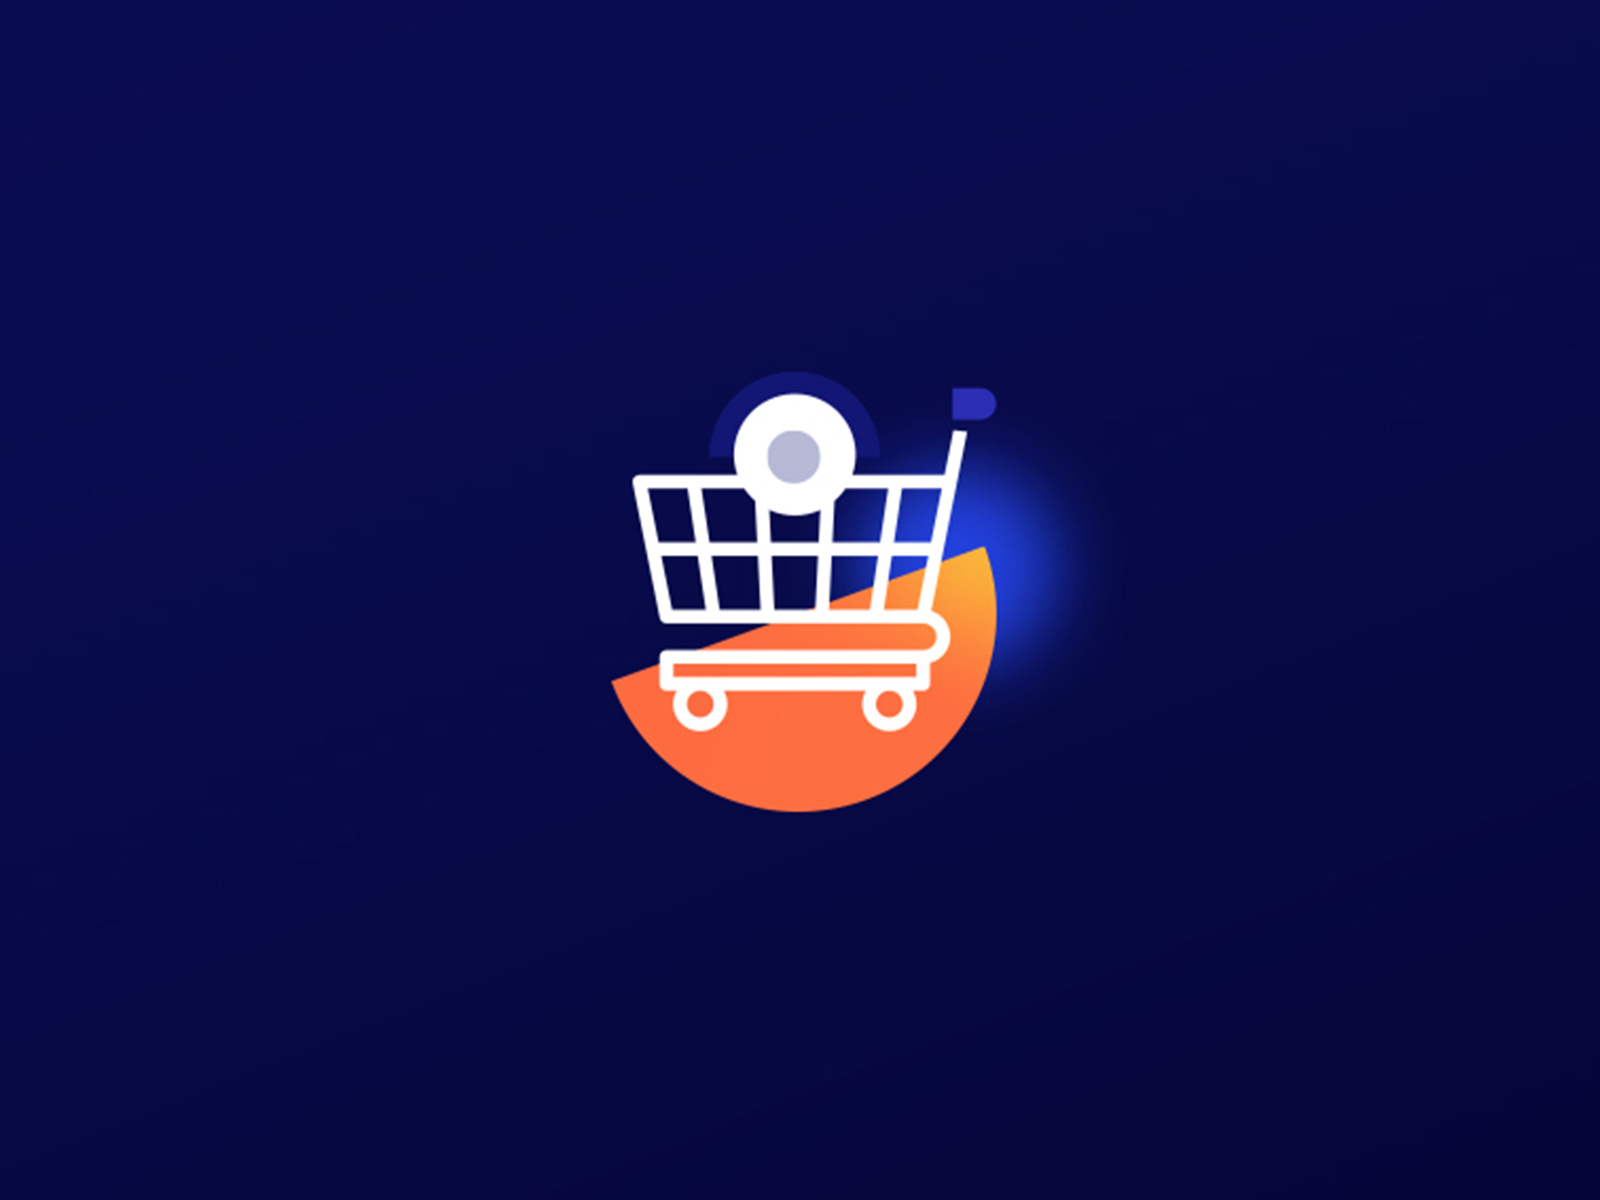 icon by Anddy Ramos on Dribbble